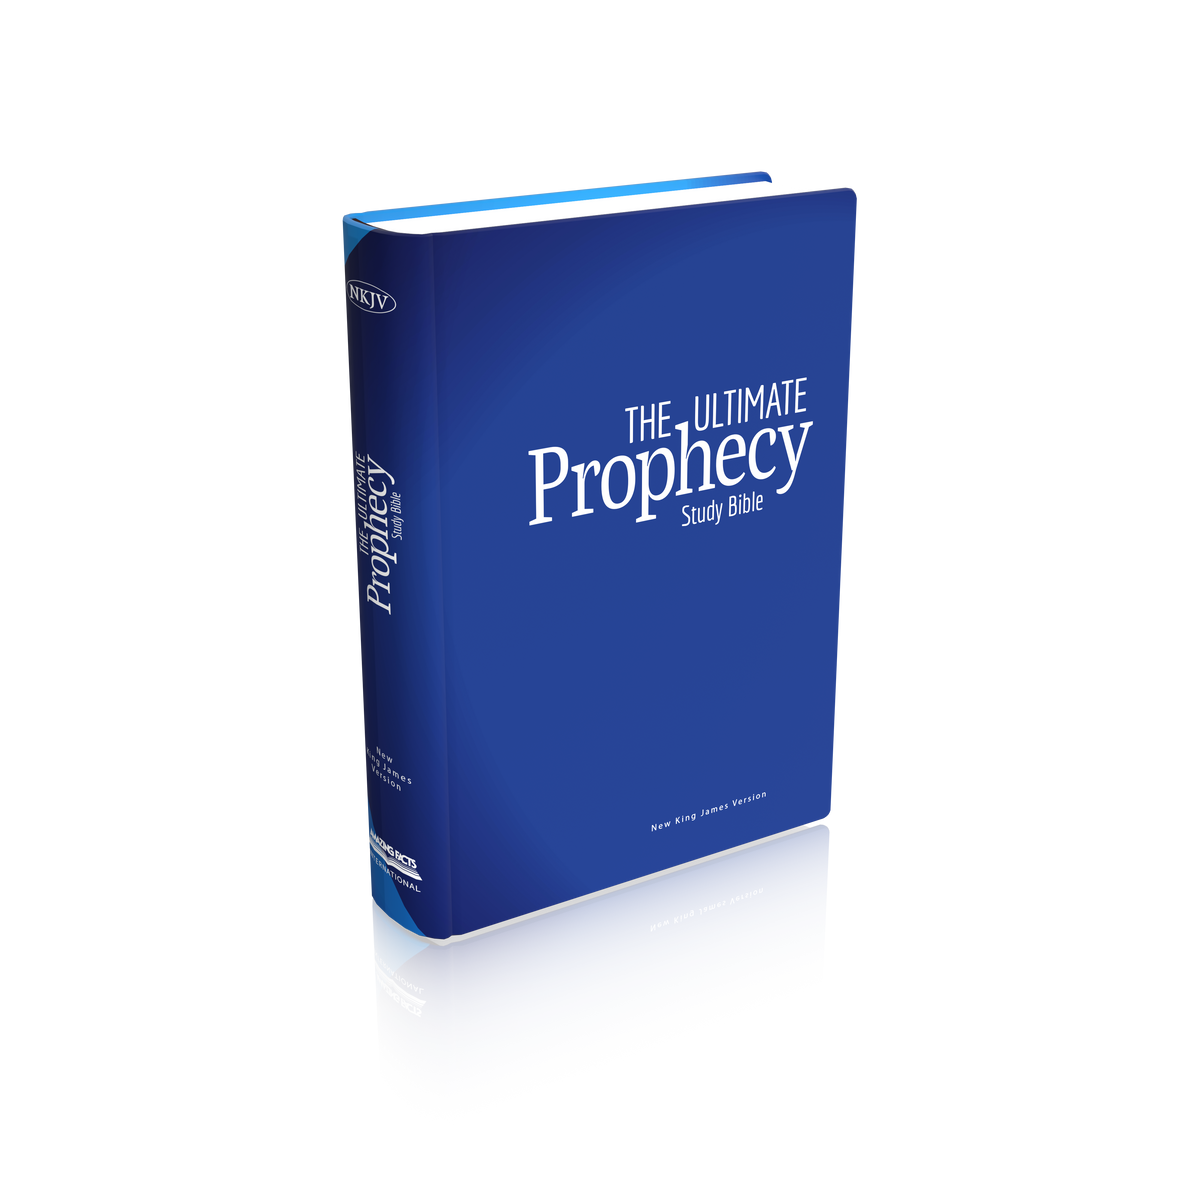 Pre-Order Now! The Ultimate Prophecy Study Bible - Hardcover by Amazing Facts